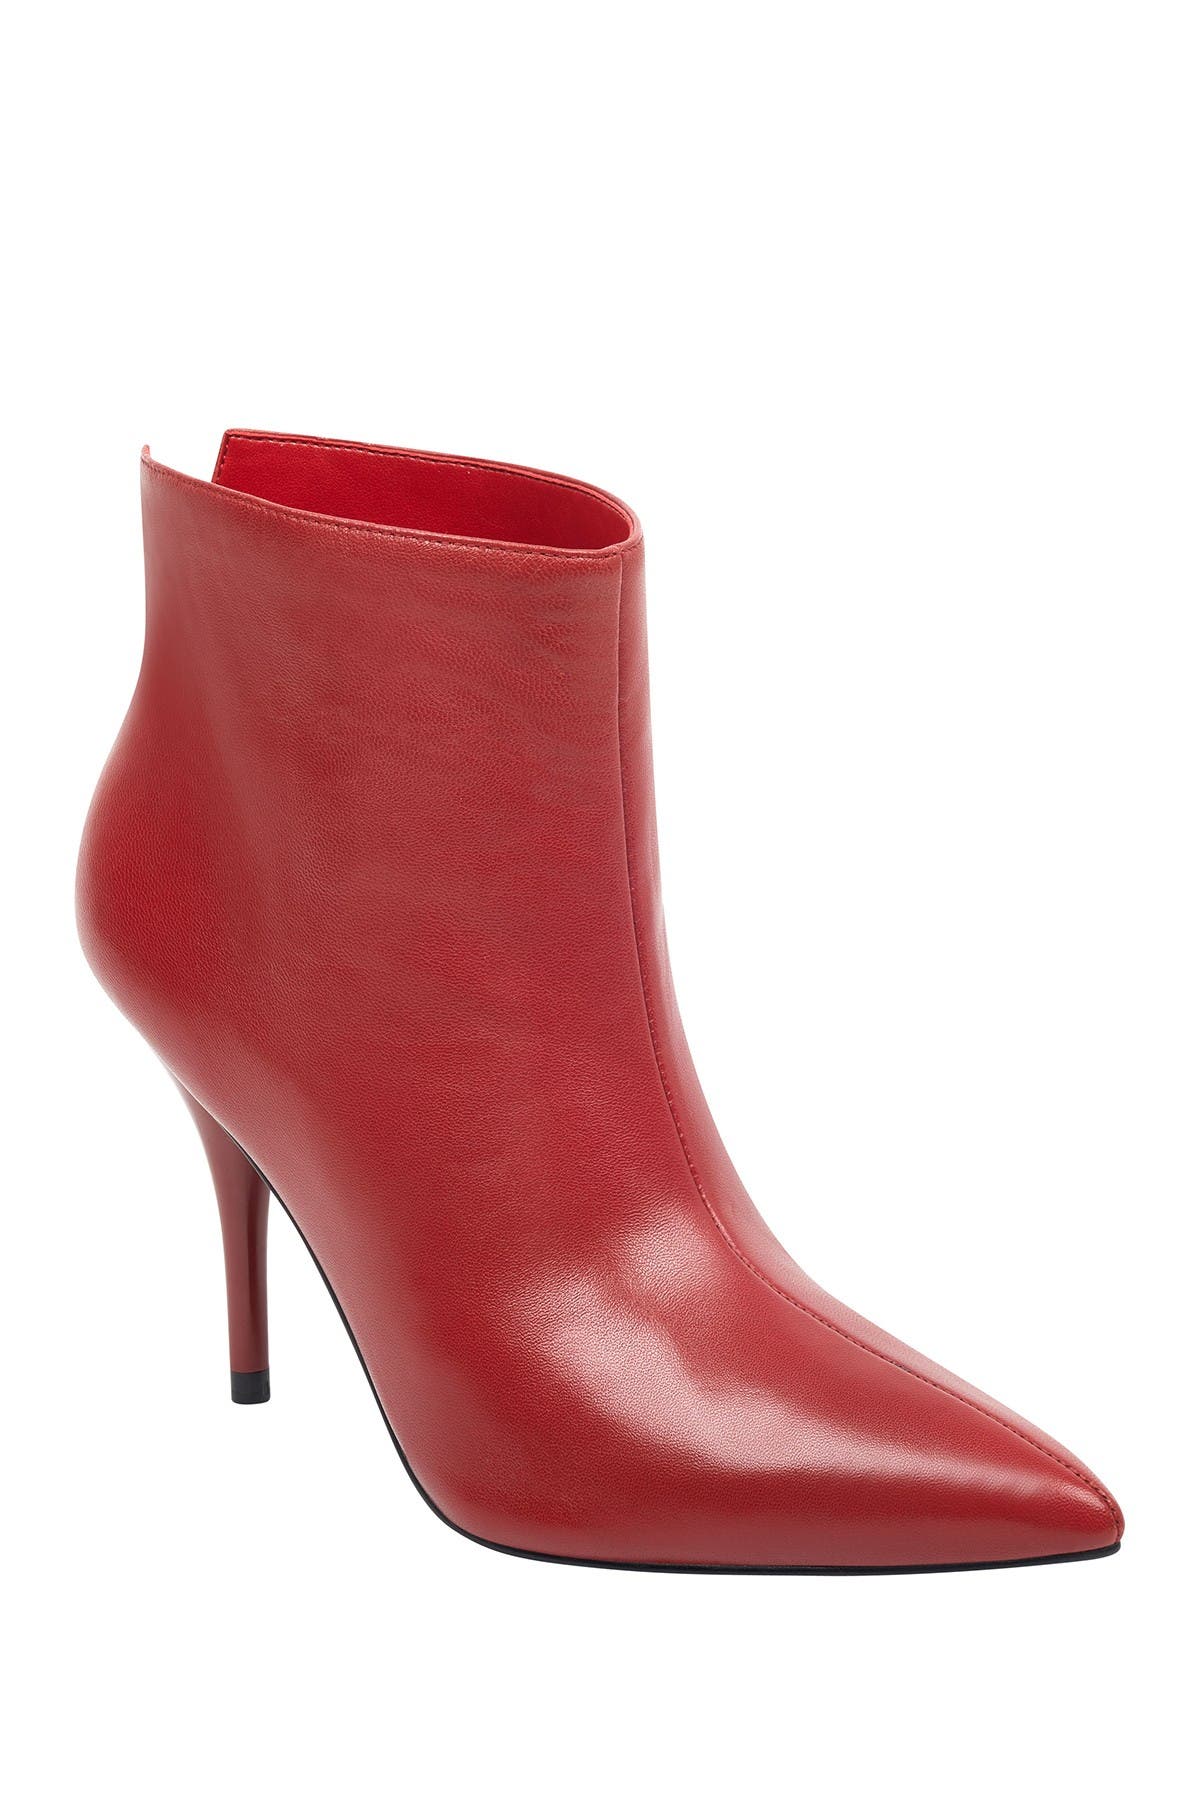 marc fisher red boots